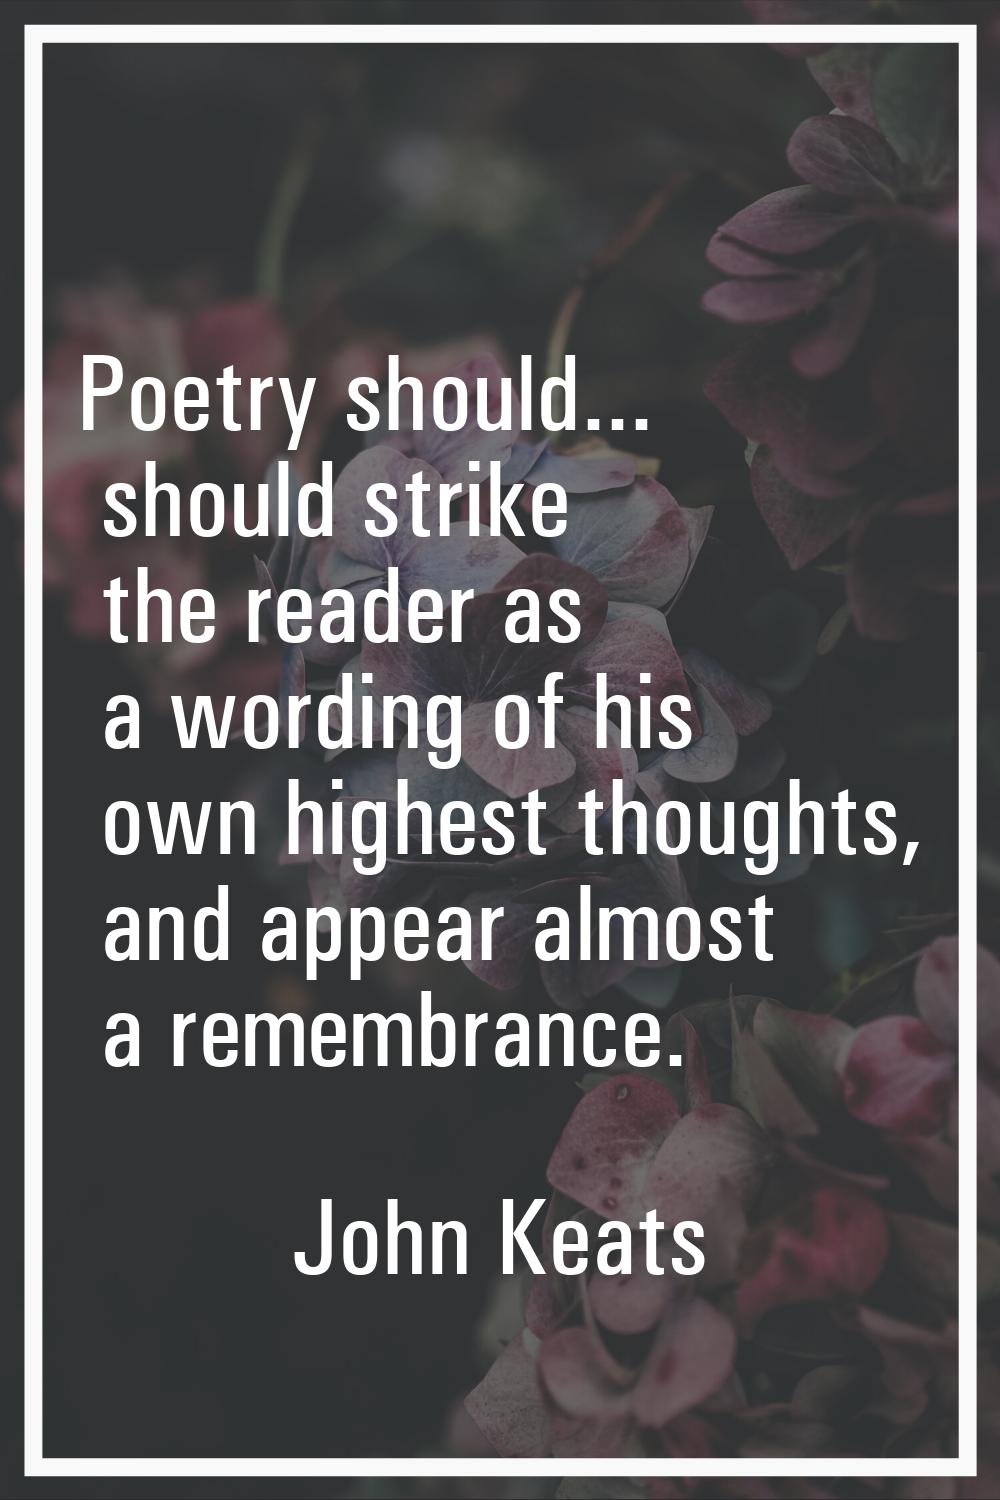 Poetry should... should strike the reader as a wording of his own highest thoughts, and appear almo